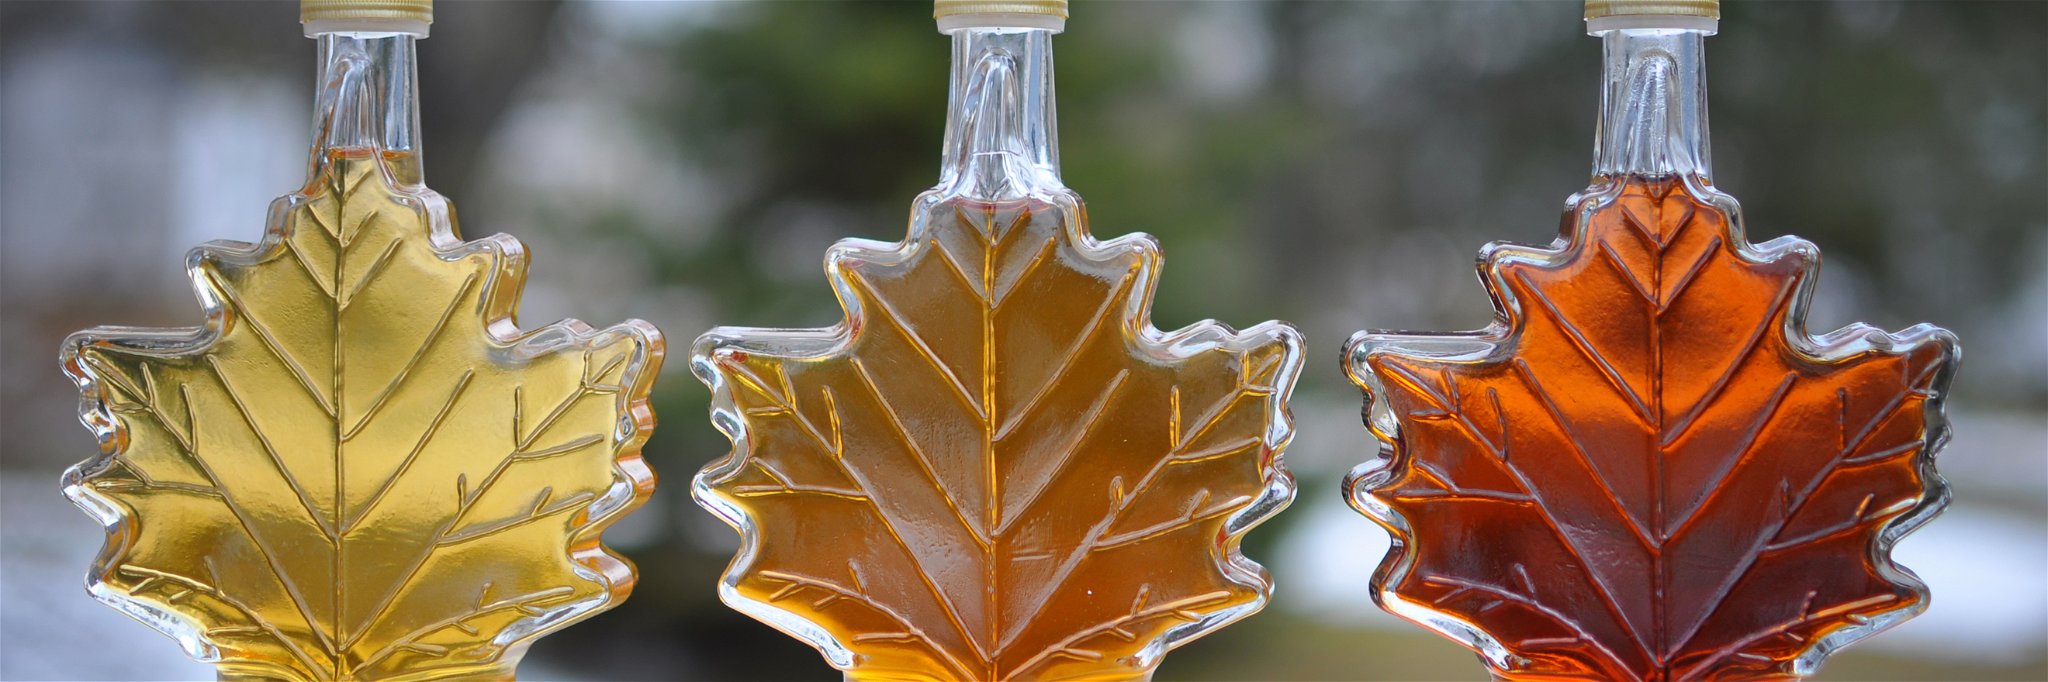 Strategic reserves of maple syrup are being released to meet rising demand.

